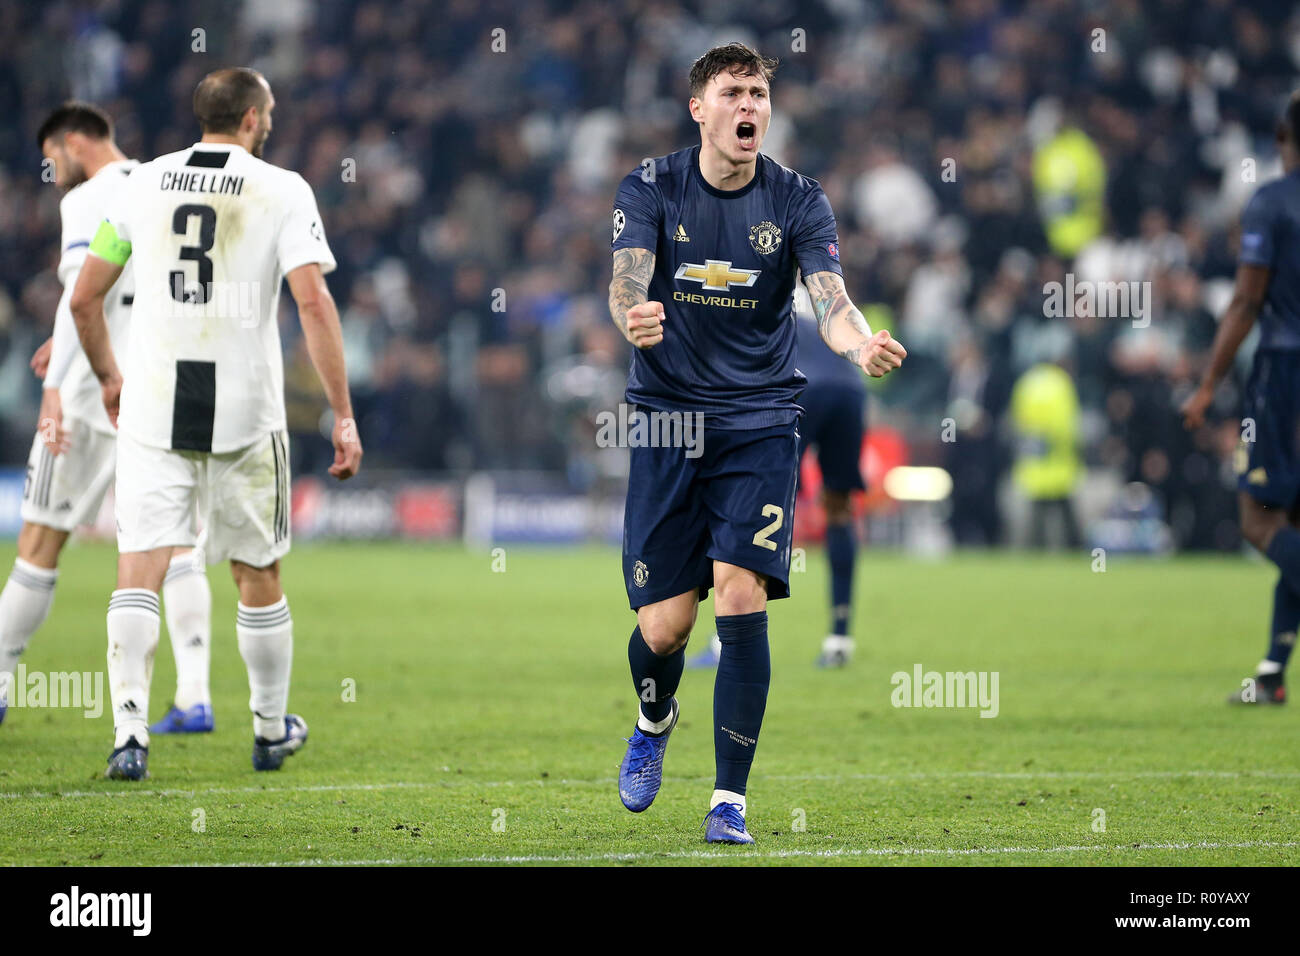 Torino, Italy. 07th November 2018. Victor Lindelof  of Manchester United Fc  celebrate et the end of the Uefa Champions League Group H match between Juventus Fc and Manchester United Fc. Credit: Marco Canoniero/Alamy Live News Stock Photo